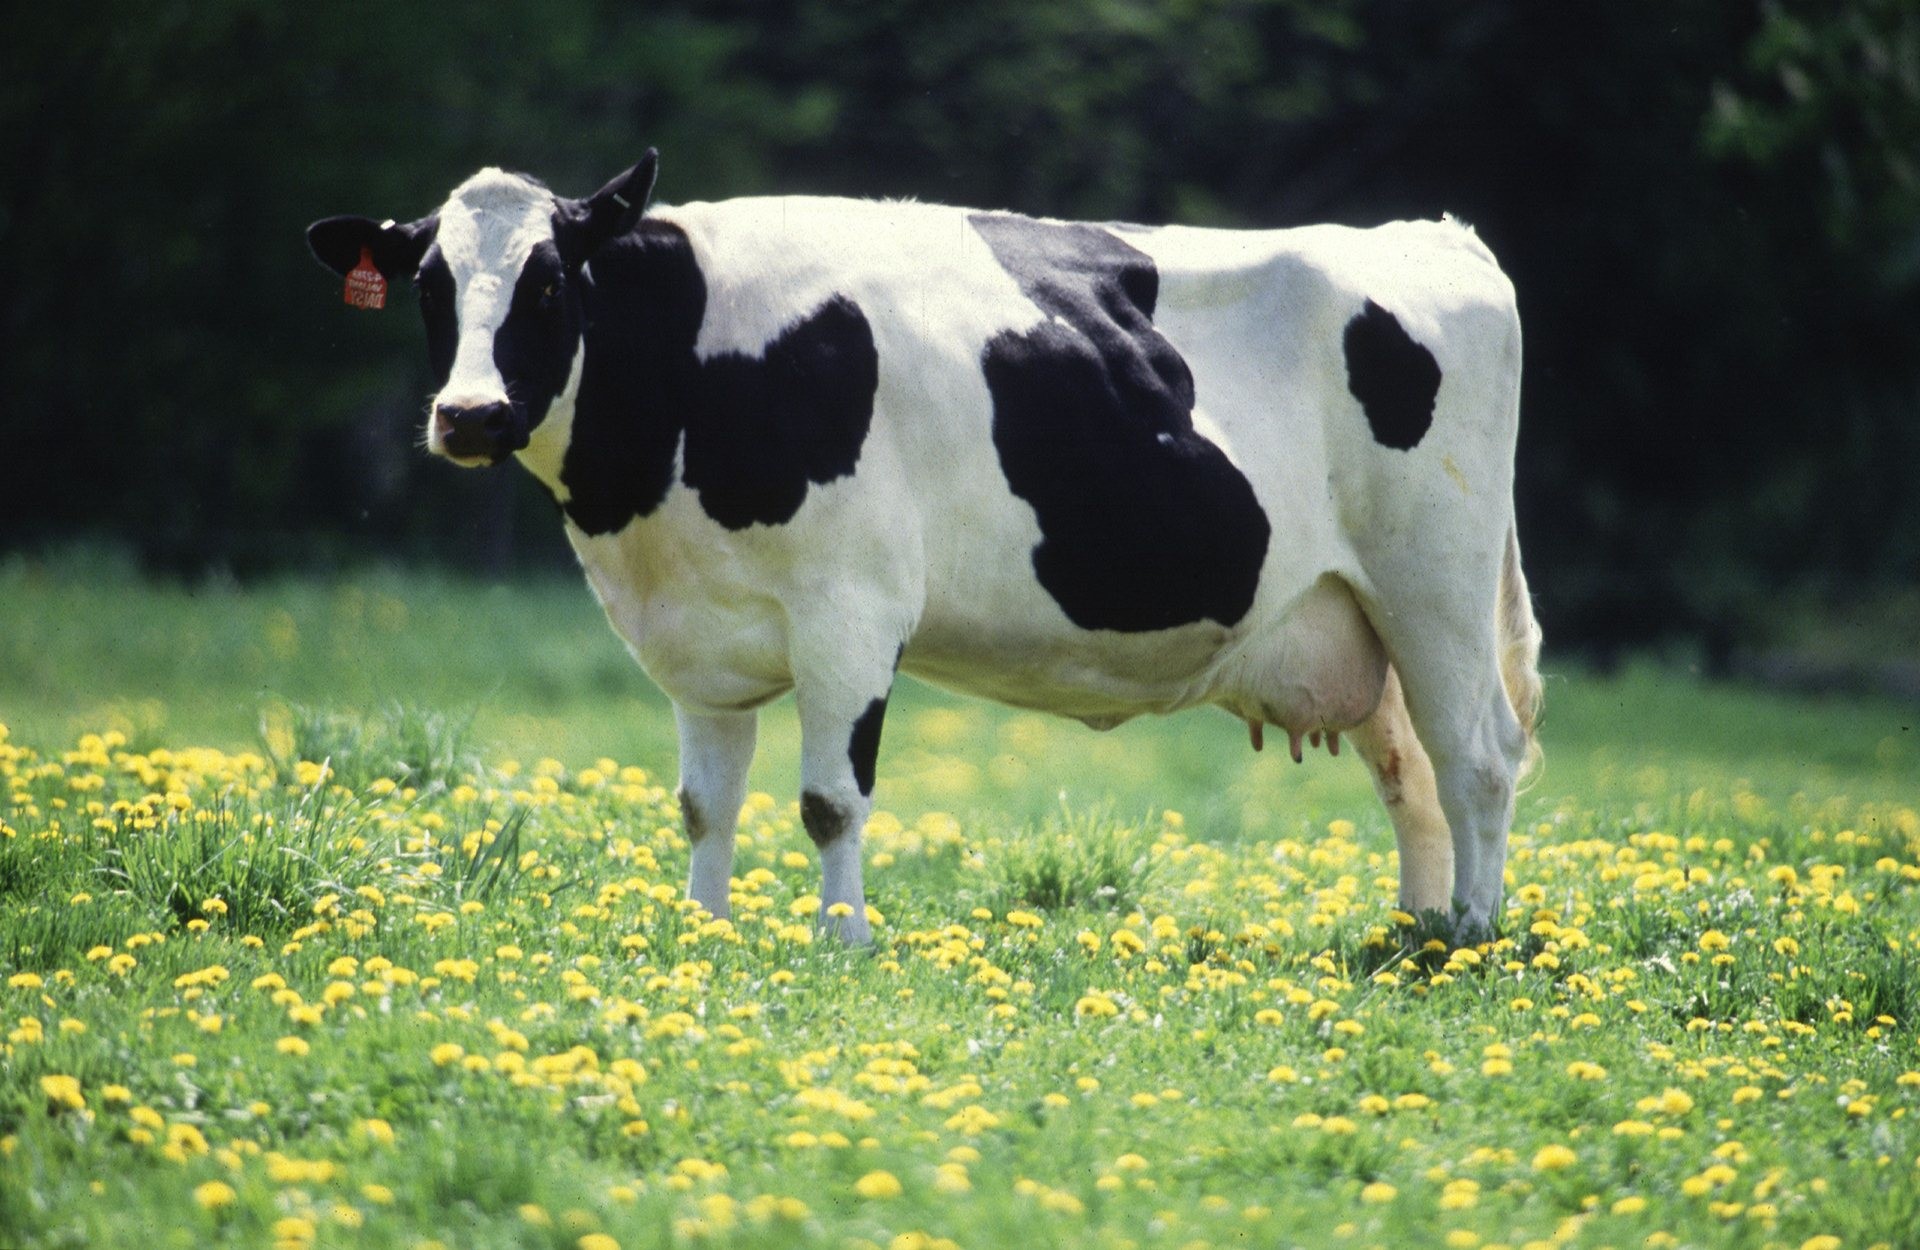 1920x1250 wallpaper.wiki-Cow-Background-Free-Download-PIC-WPB0011874